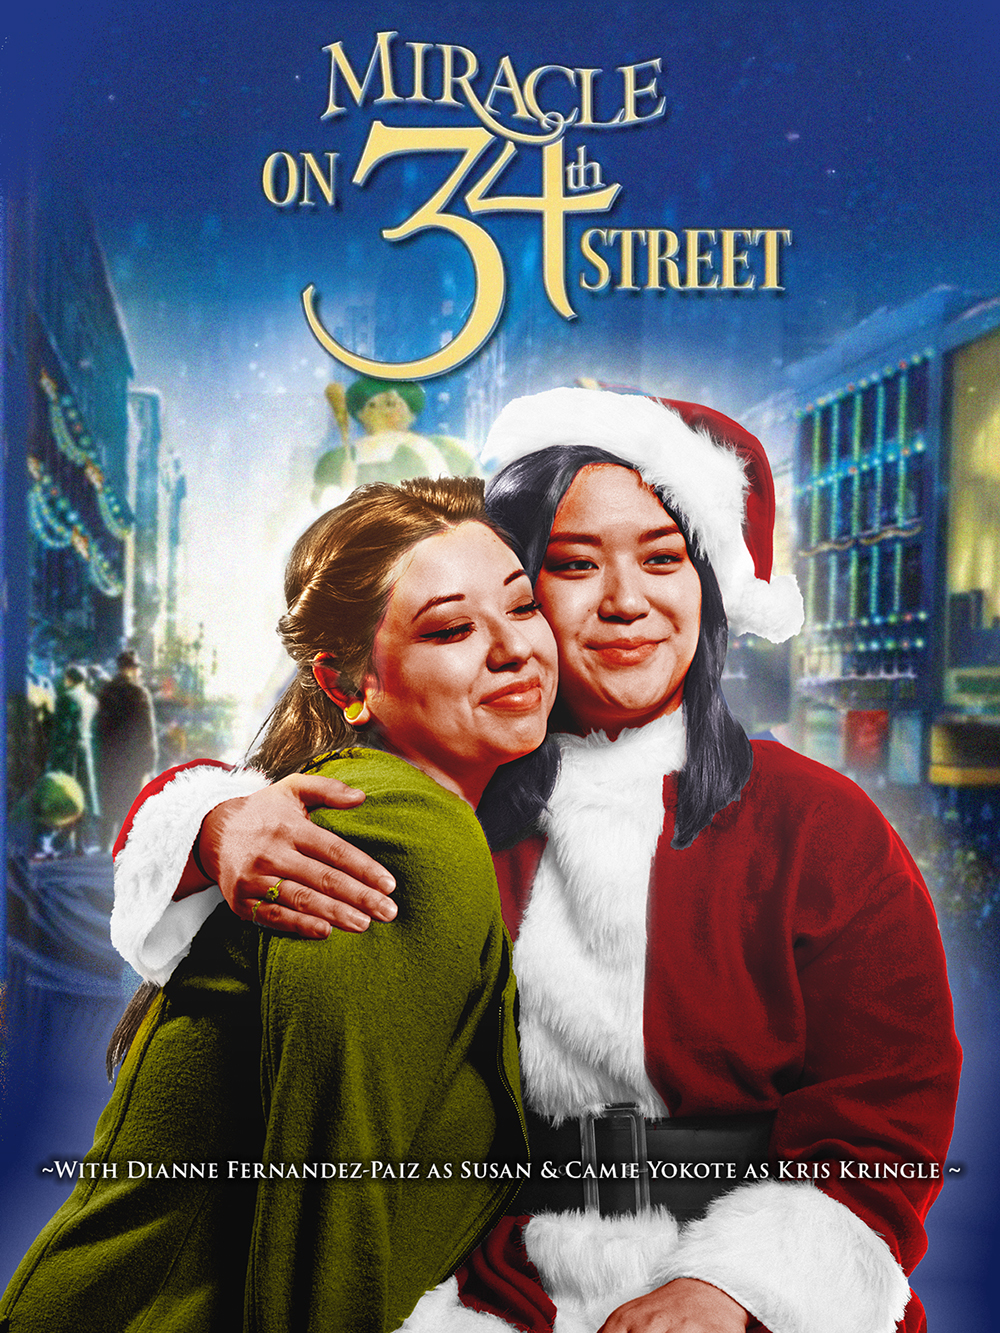 Dianne and Camie in Miracle on 34th Street 